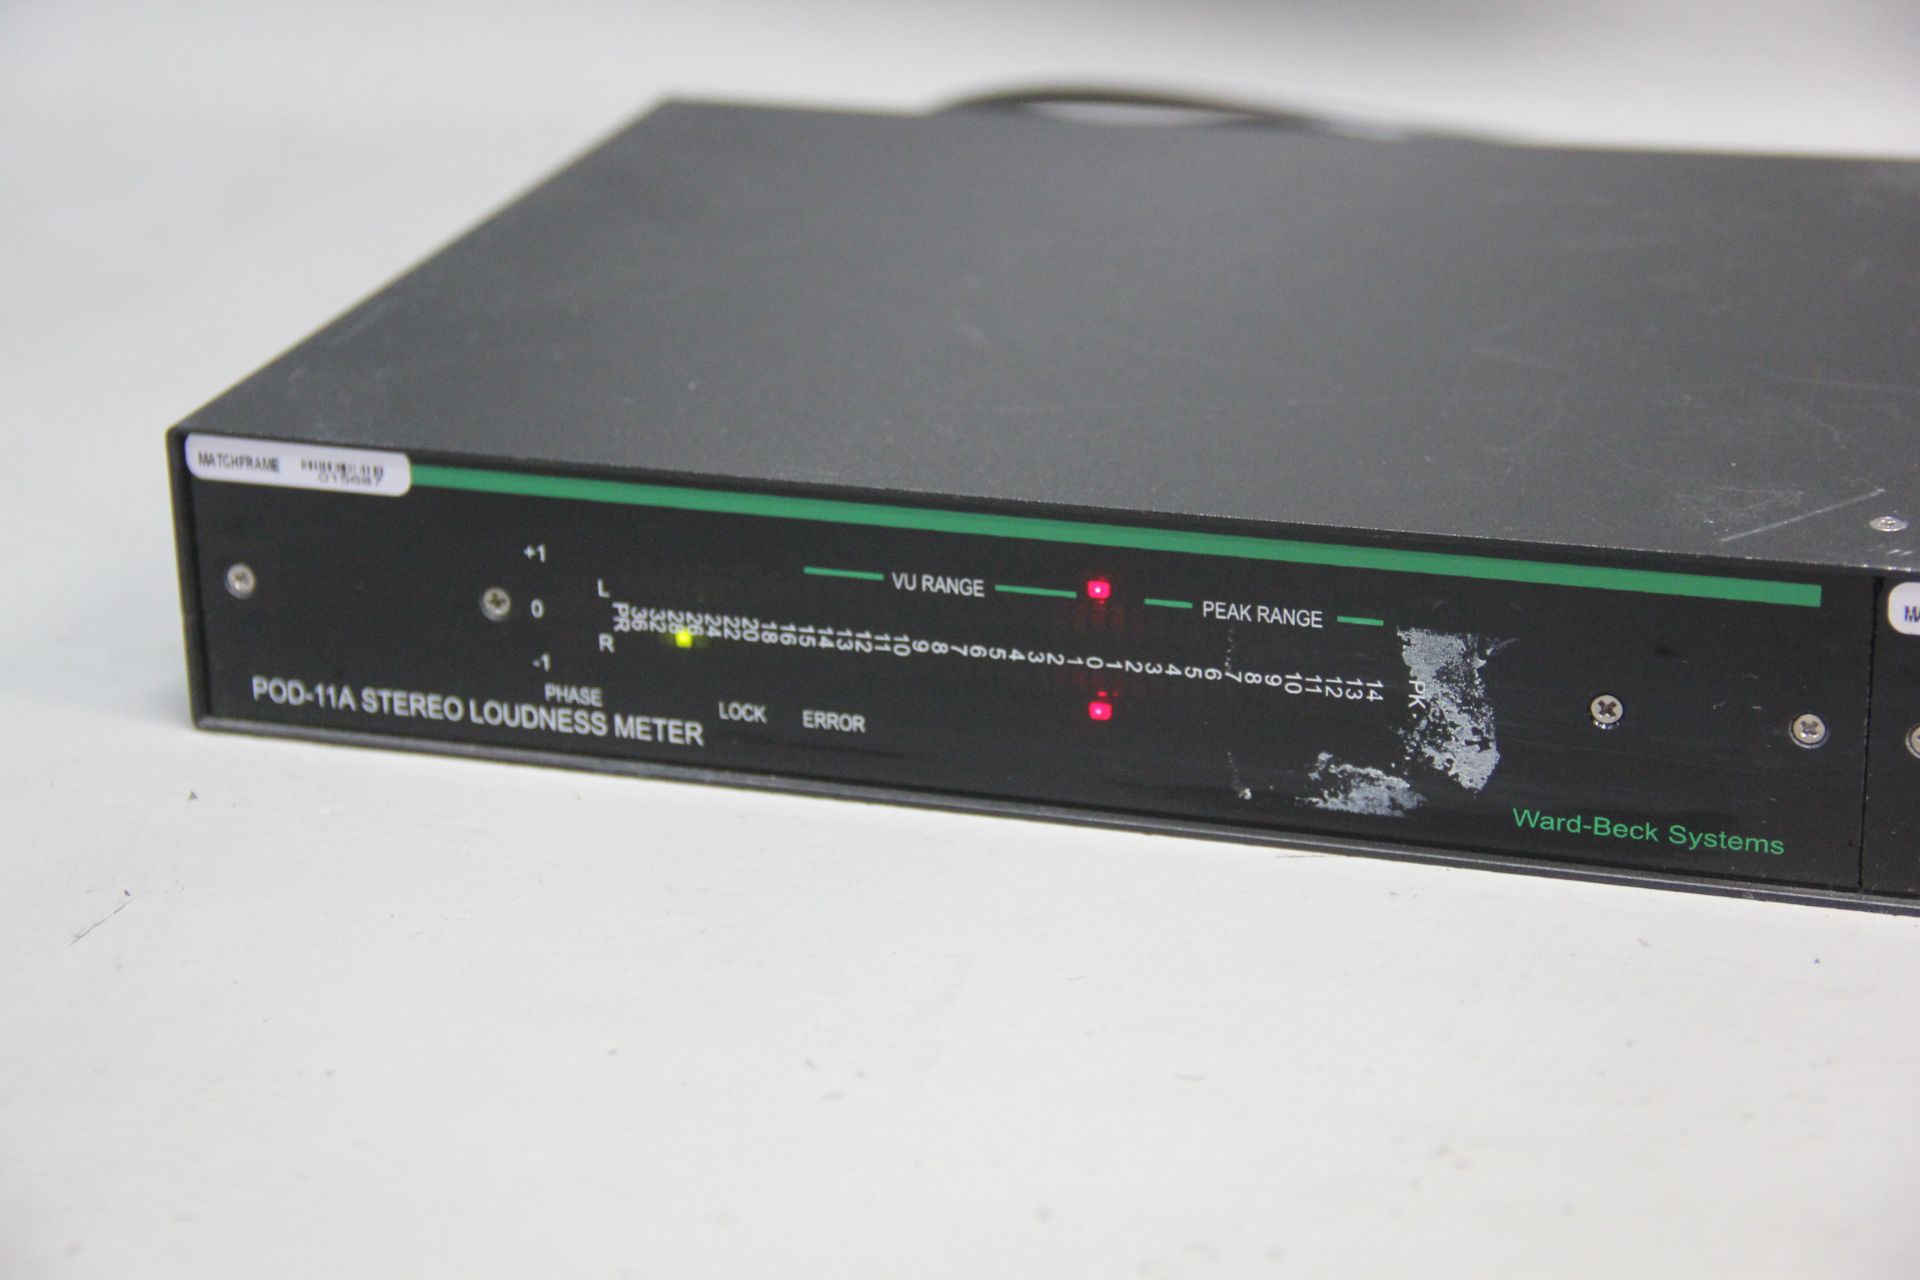 WBS WARD BECK POD-11A STEREO LOUDNESS METER AUDIO SWITCHER - Image 2 of 5